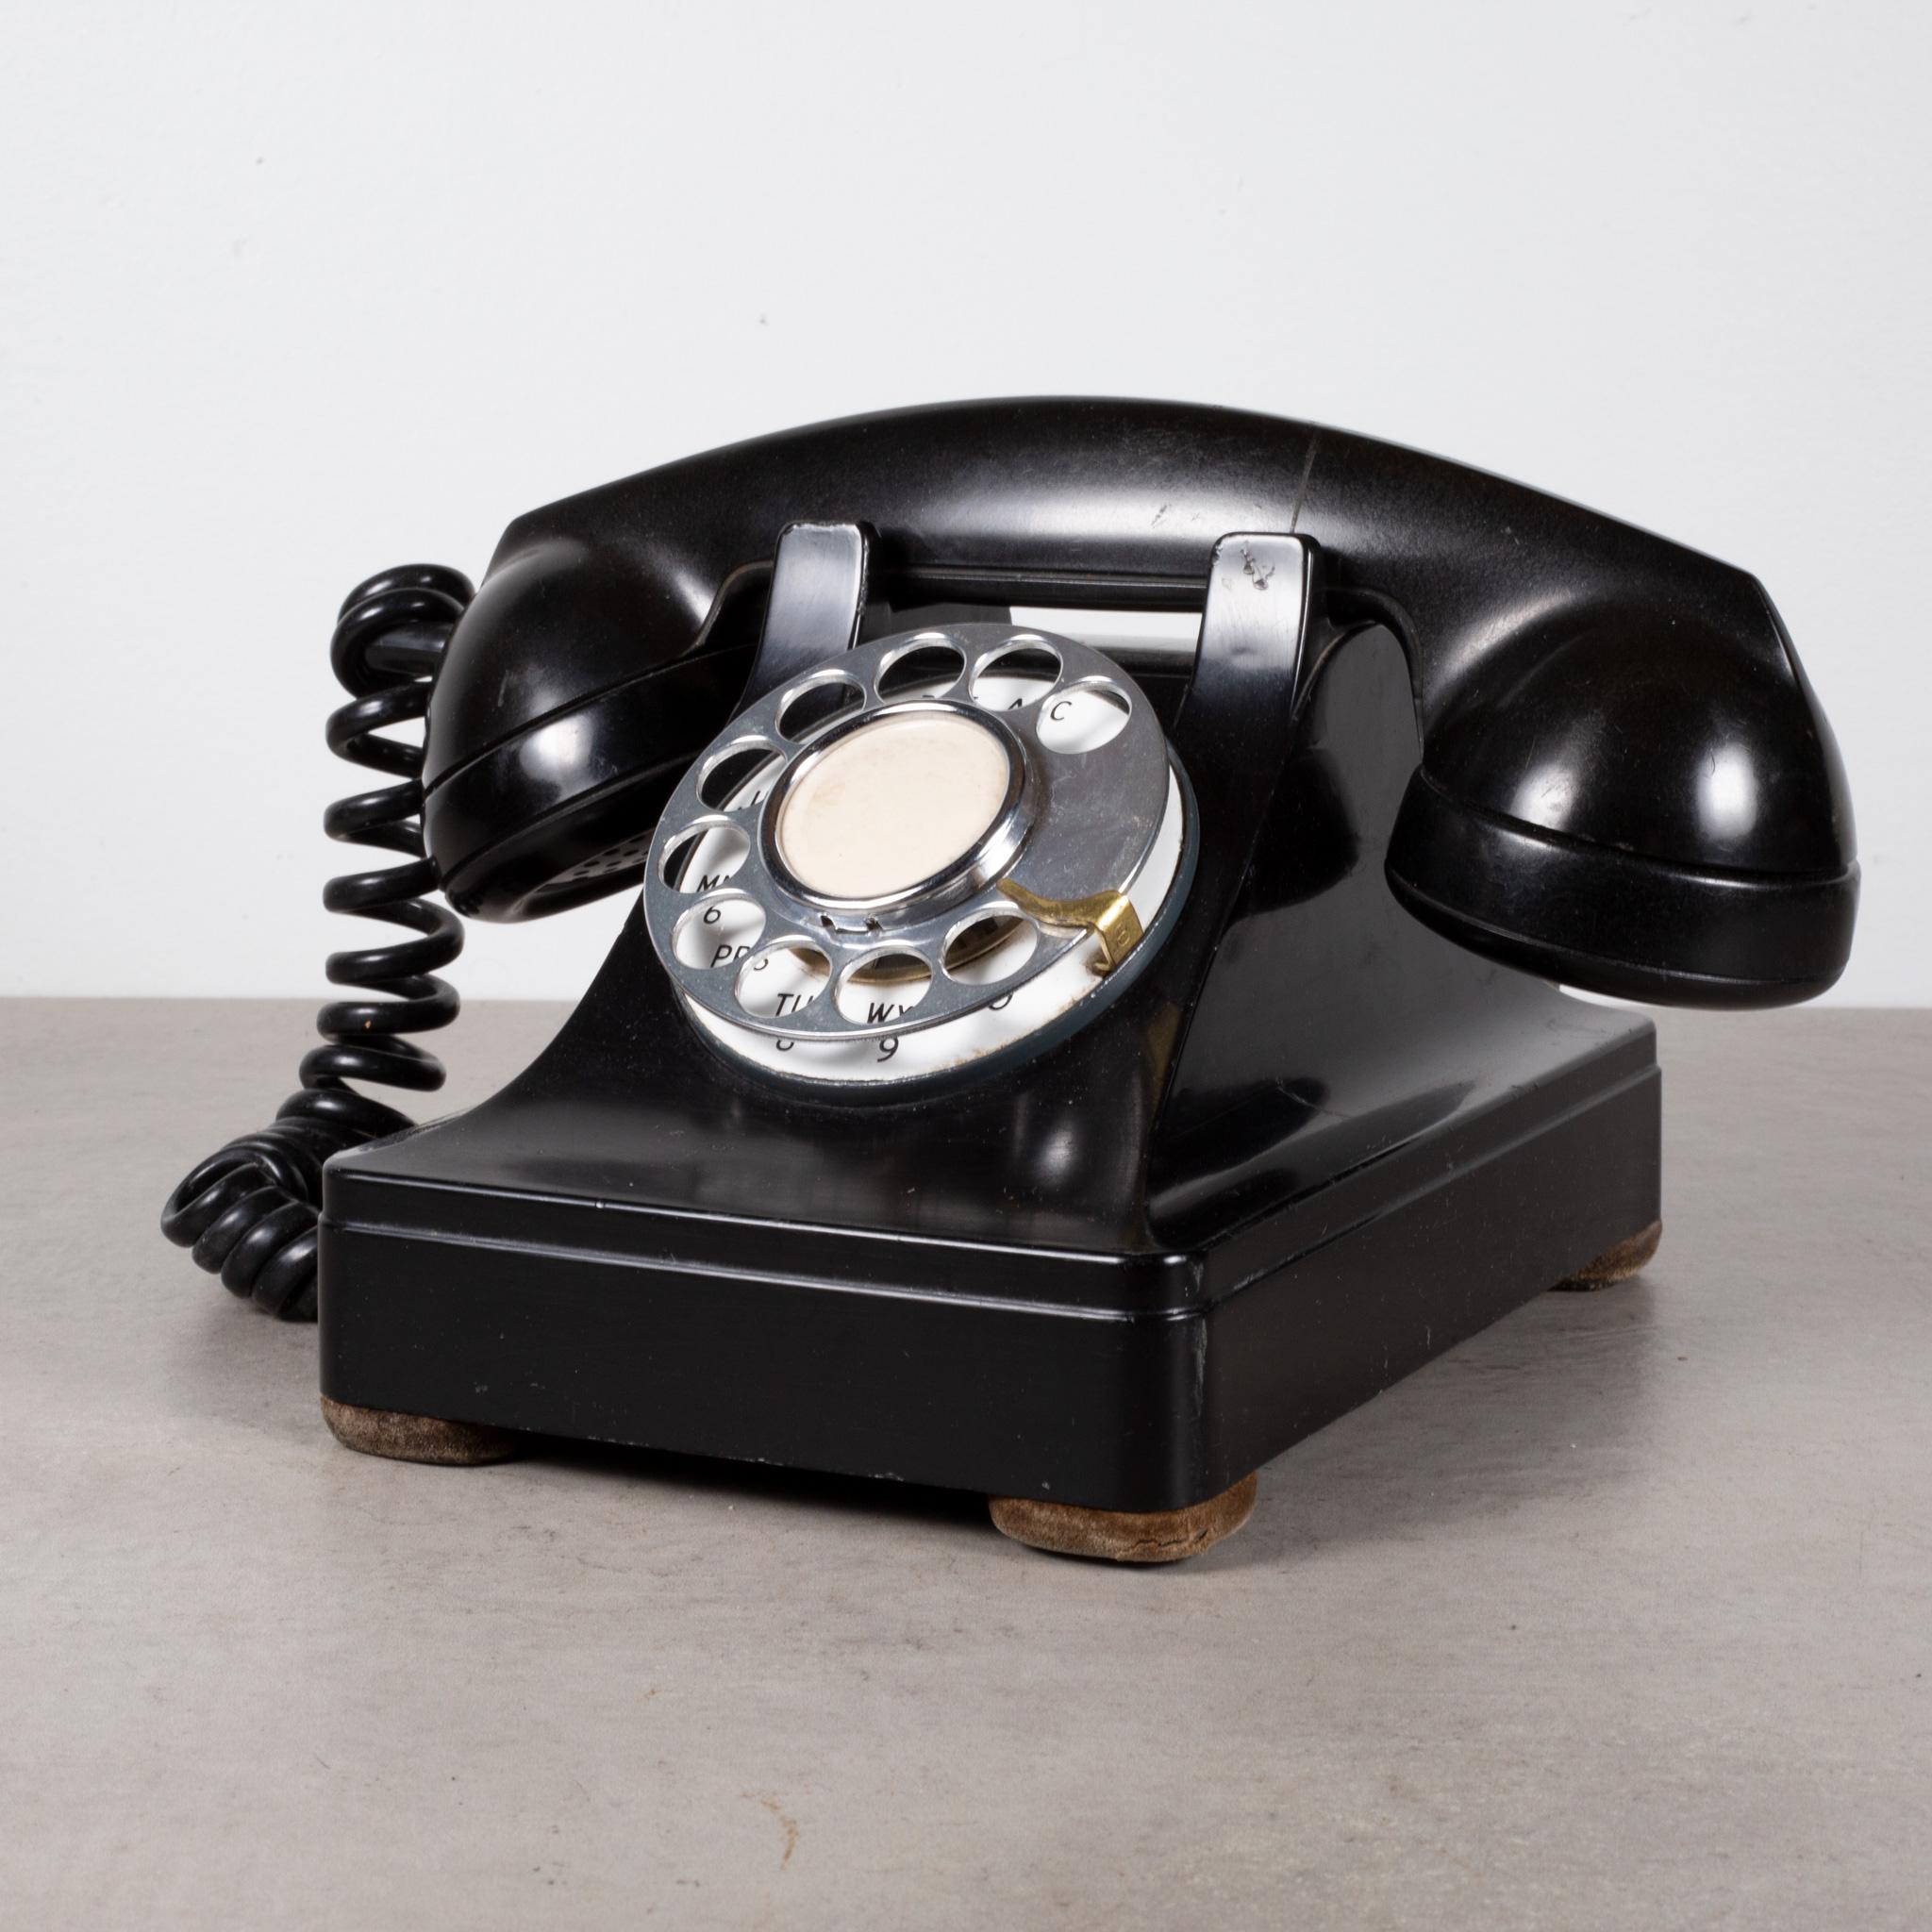 About

An original pre-war rotary telephone with Bakelite body and metal interior. Stamped 